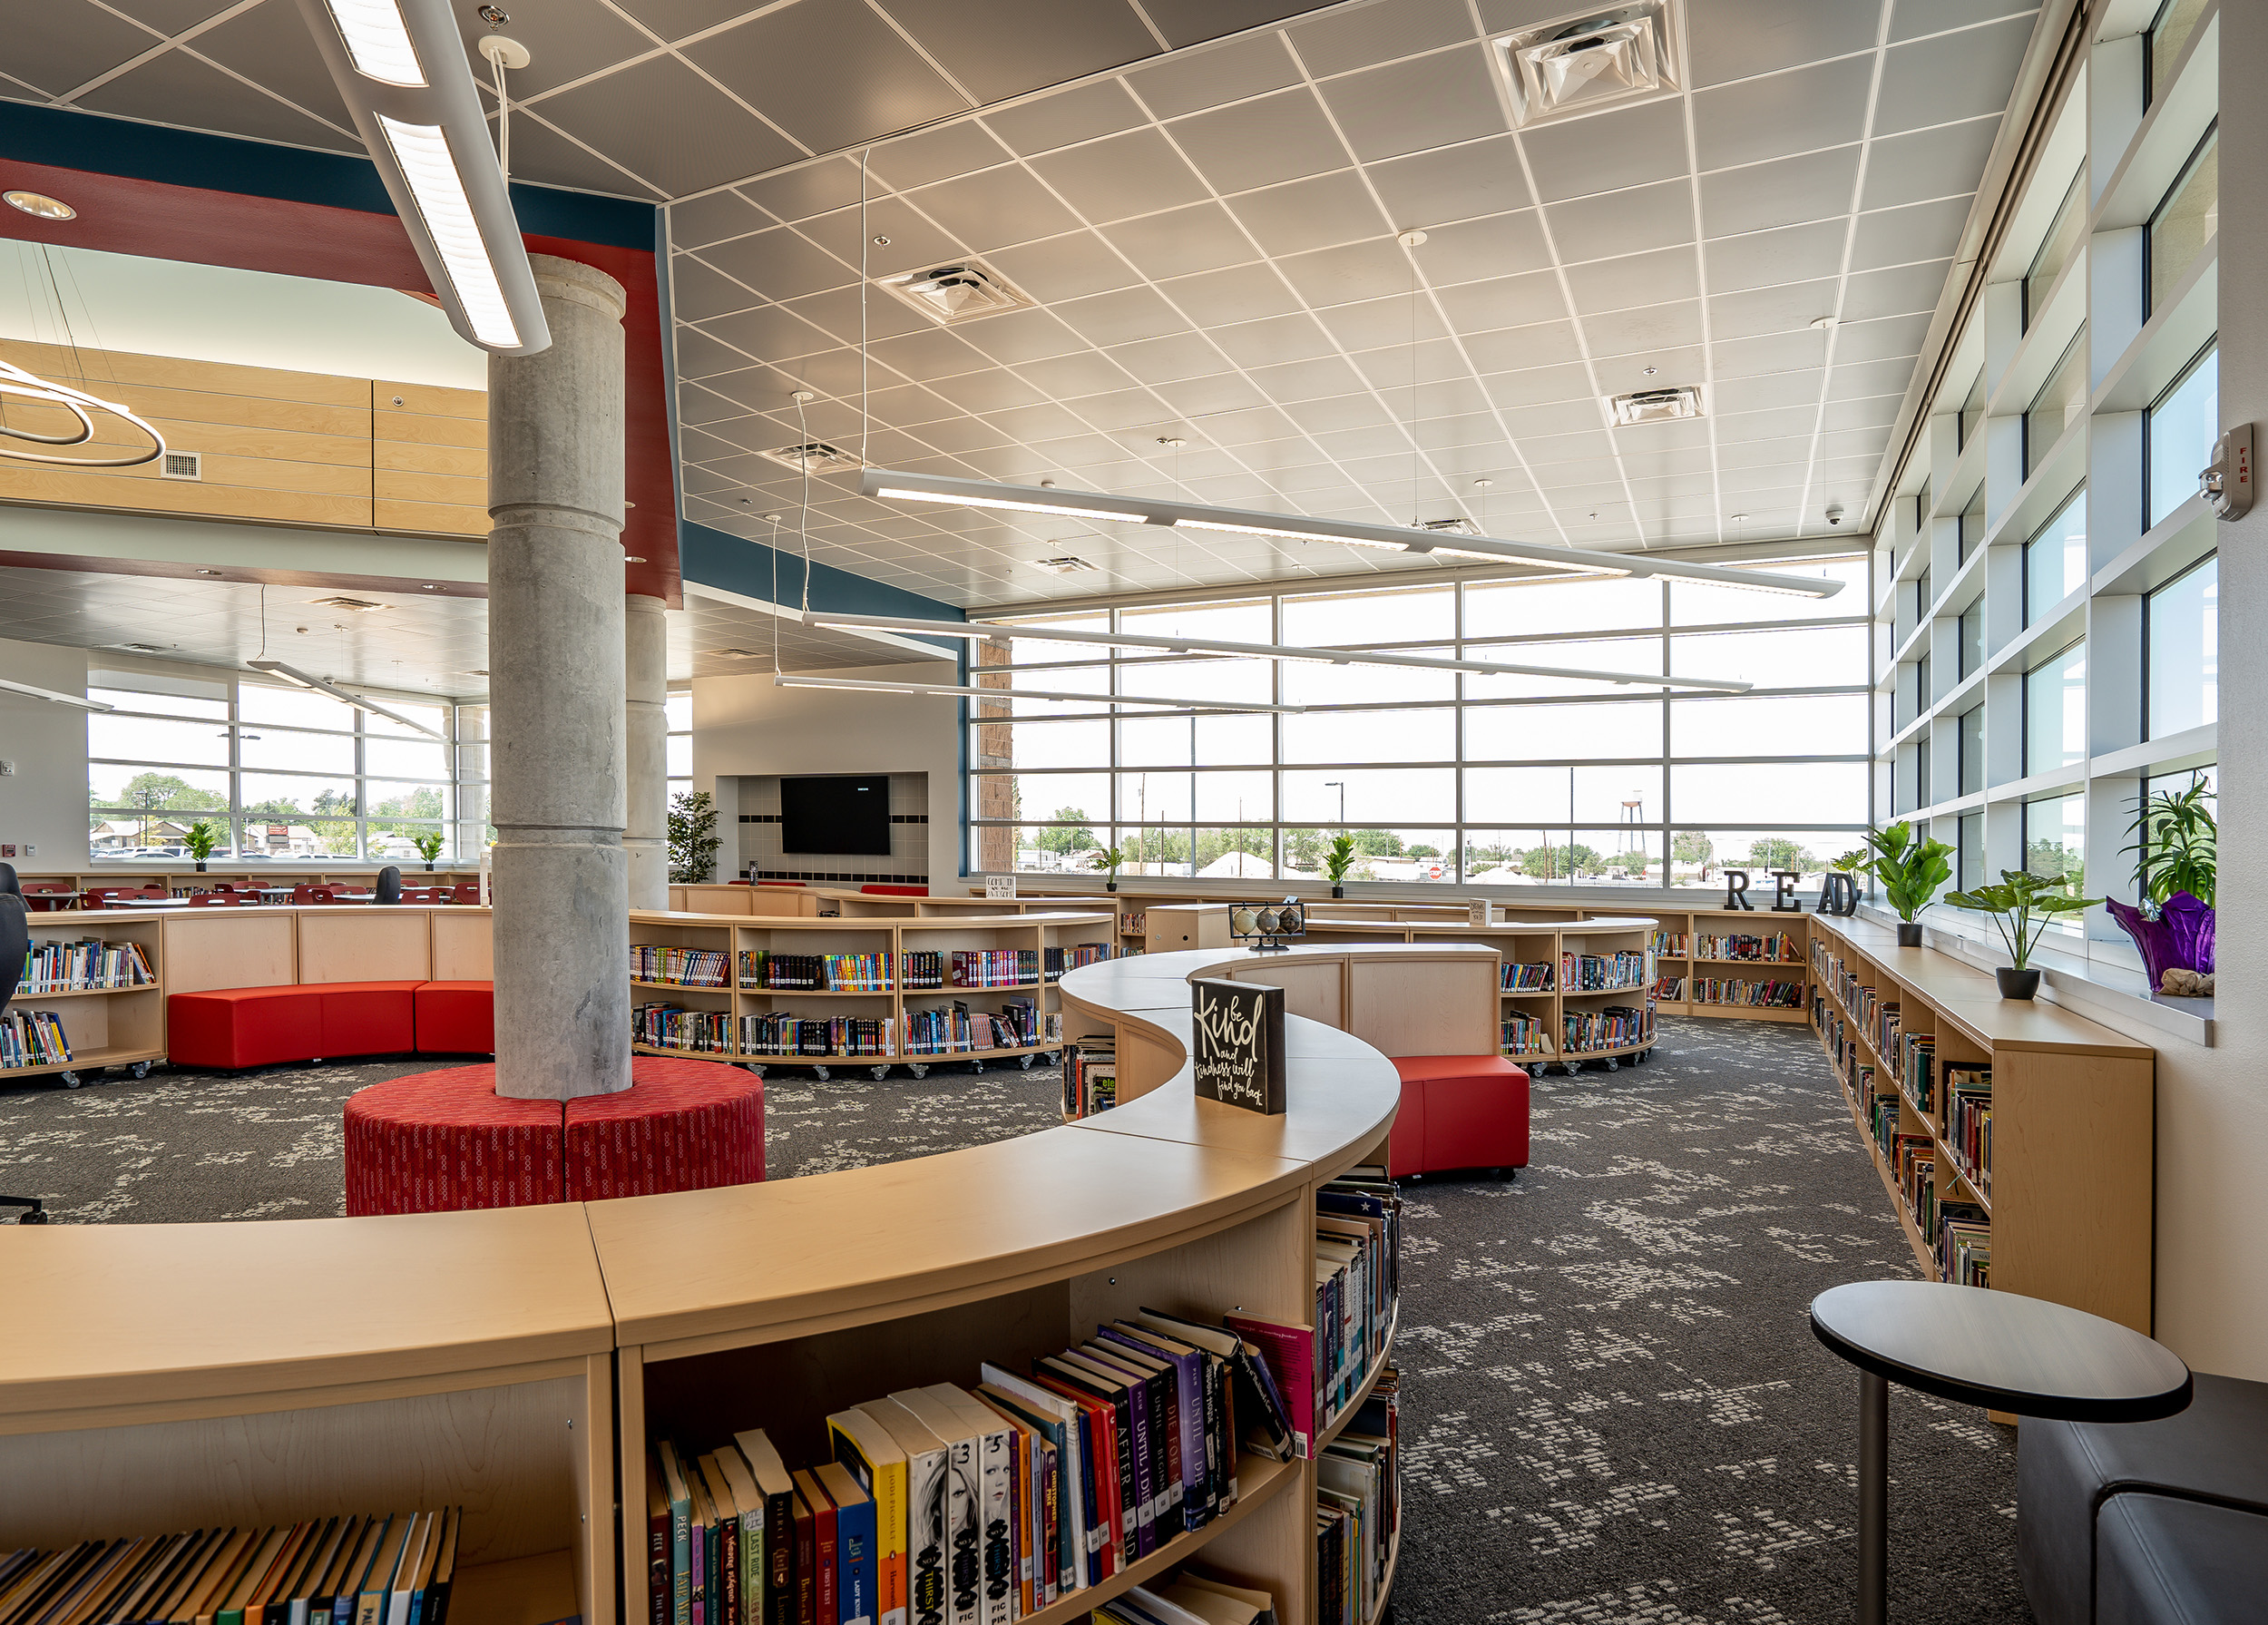 The classrooms at Caton Middle School offer natural and electric lighting to support energy efficacy.